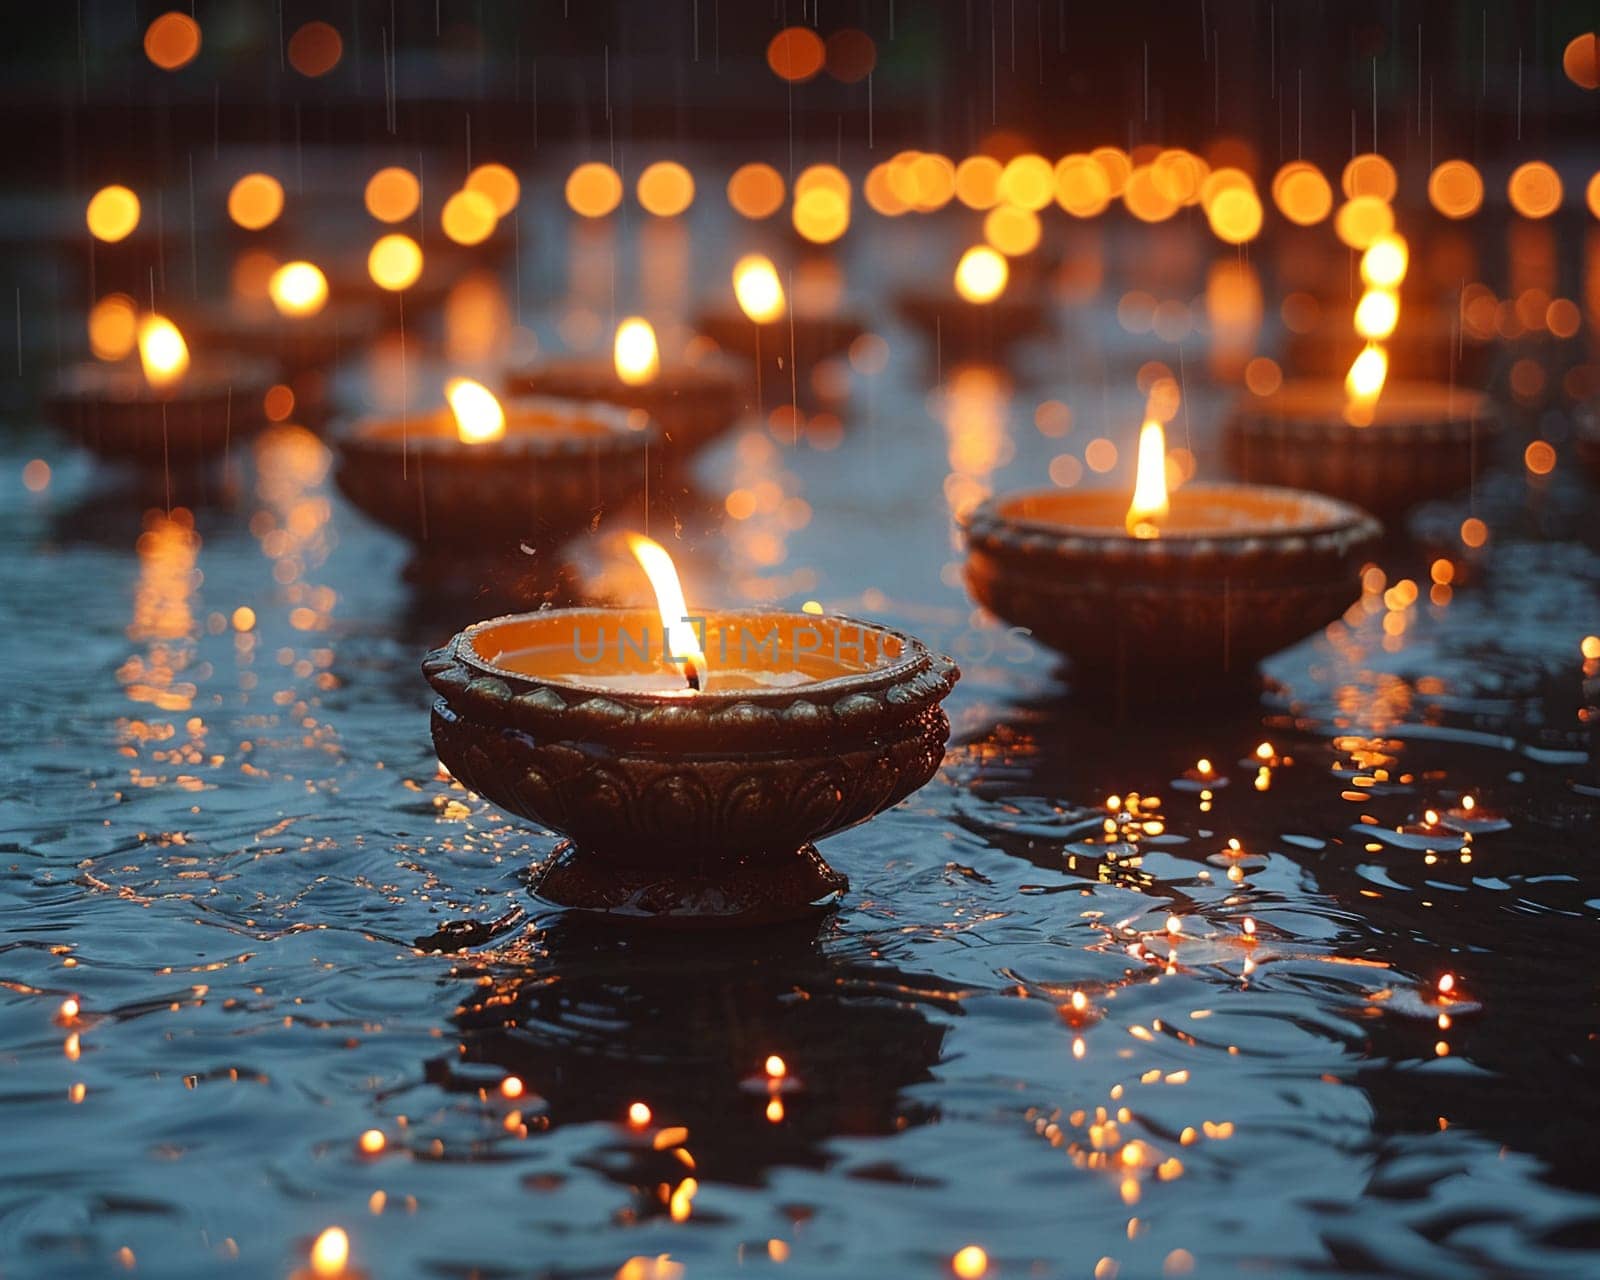 Hindu Diya Lamps Casting Soft Glows for Diwali The lights blur together by Benzoix